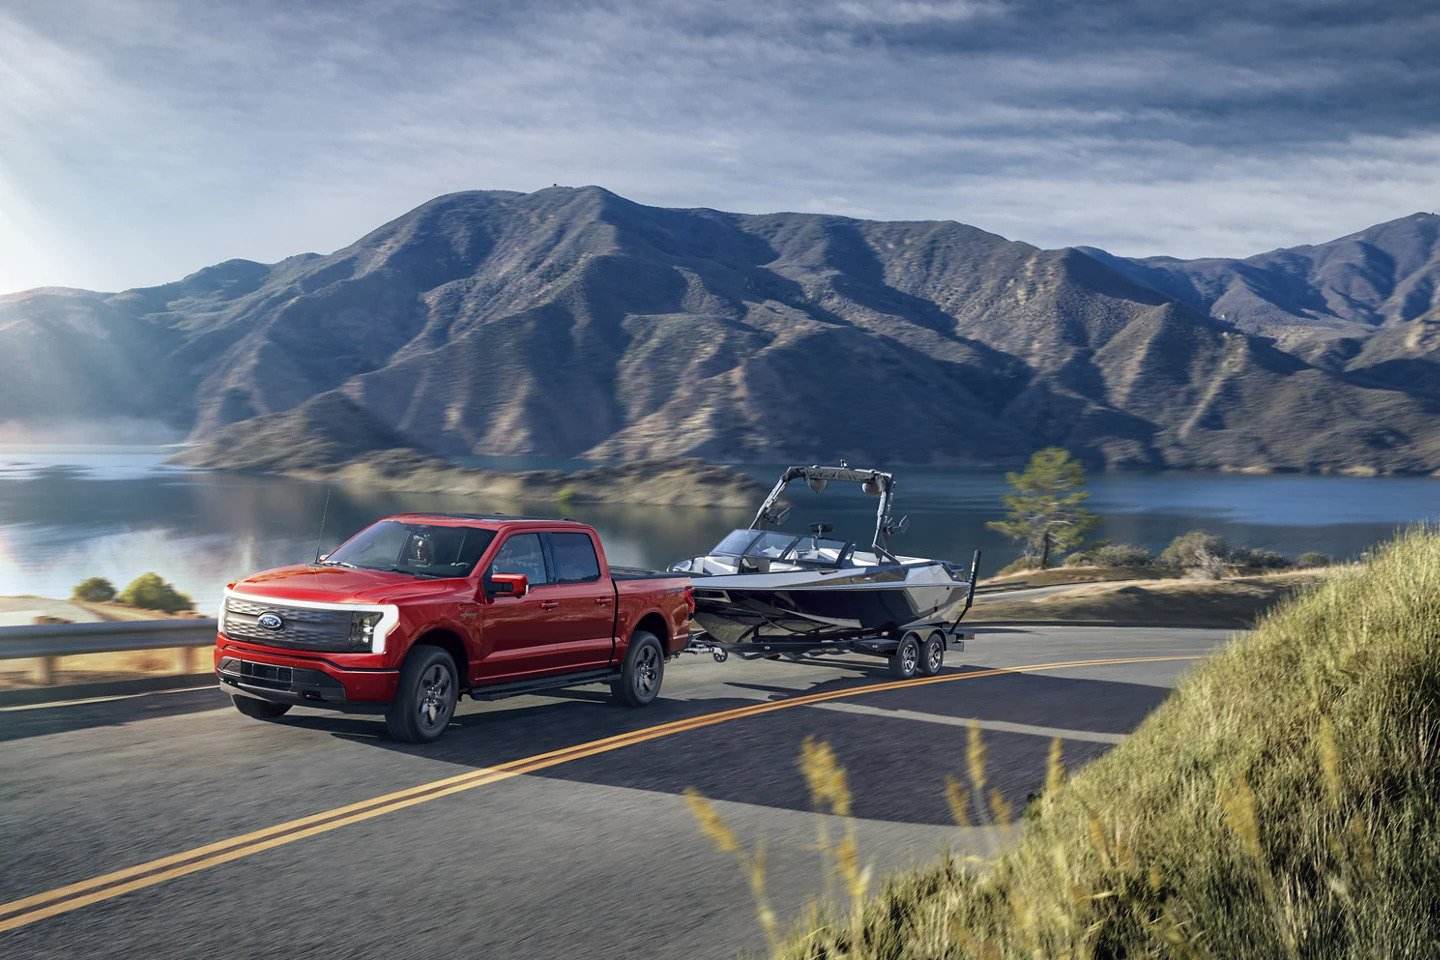 Experience the unparalleled potential of the extraordinary 2020 Ford F-150 Lightning®. Boasting durable construction and resourcefulness, this truck consistently gets the job done. Visit Ted Russell Ford in Knoxville, Tennessee, to view their full assortment of F-150 Lightning and bring one home with you!